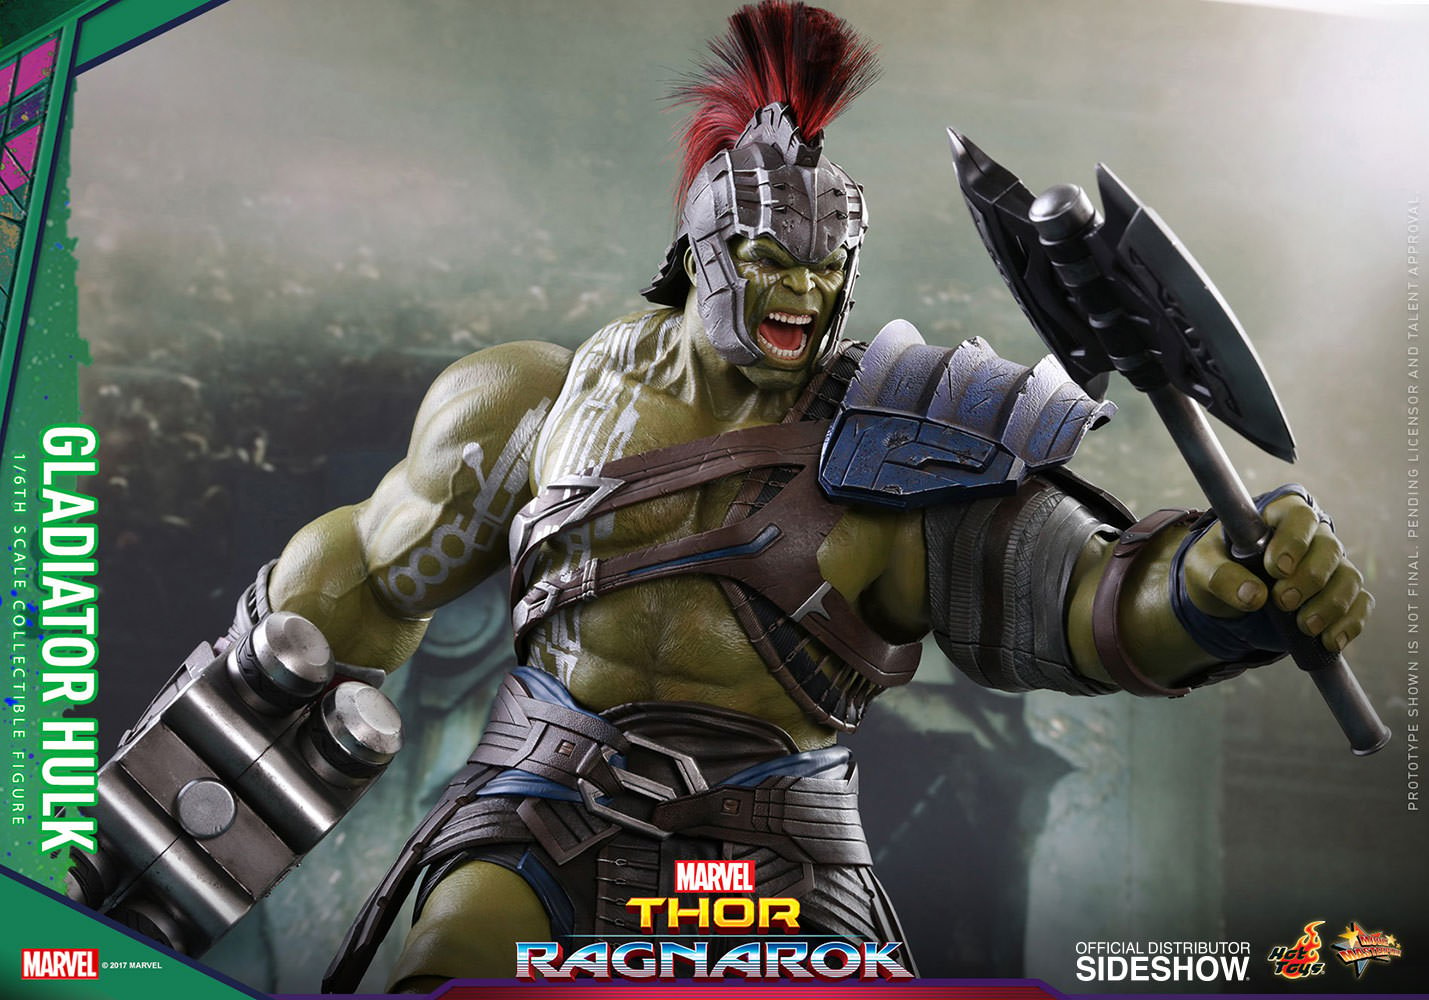 Marvel Gladiator Hulk Sixth Scale Figure by Hot Toys | Sideshow Collectibles